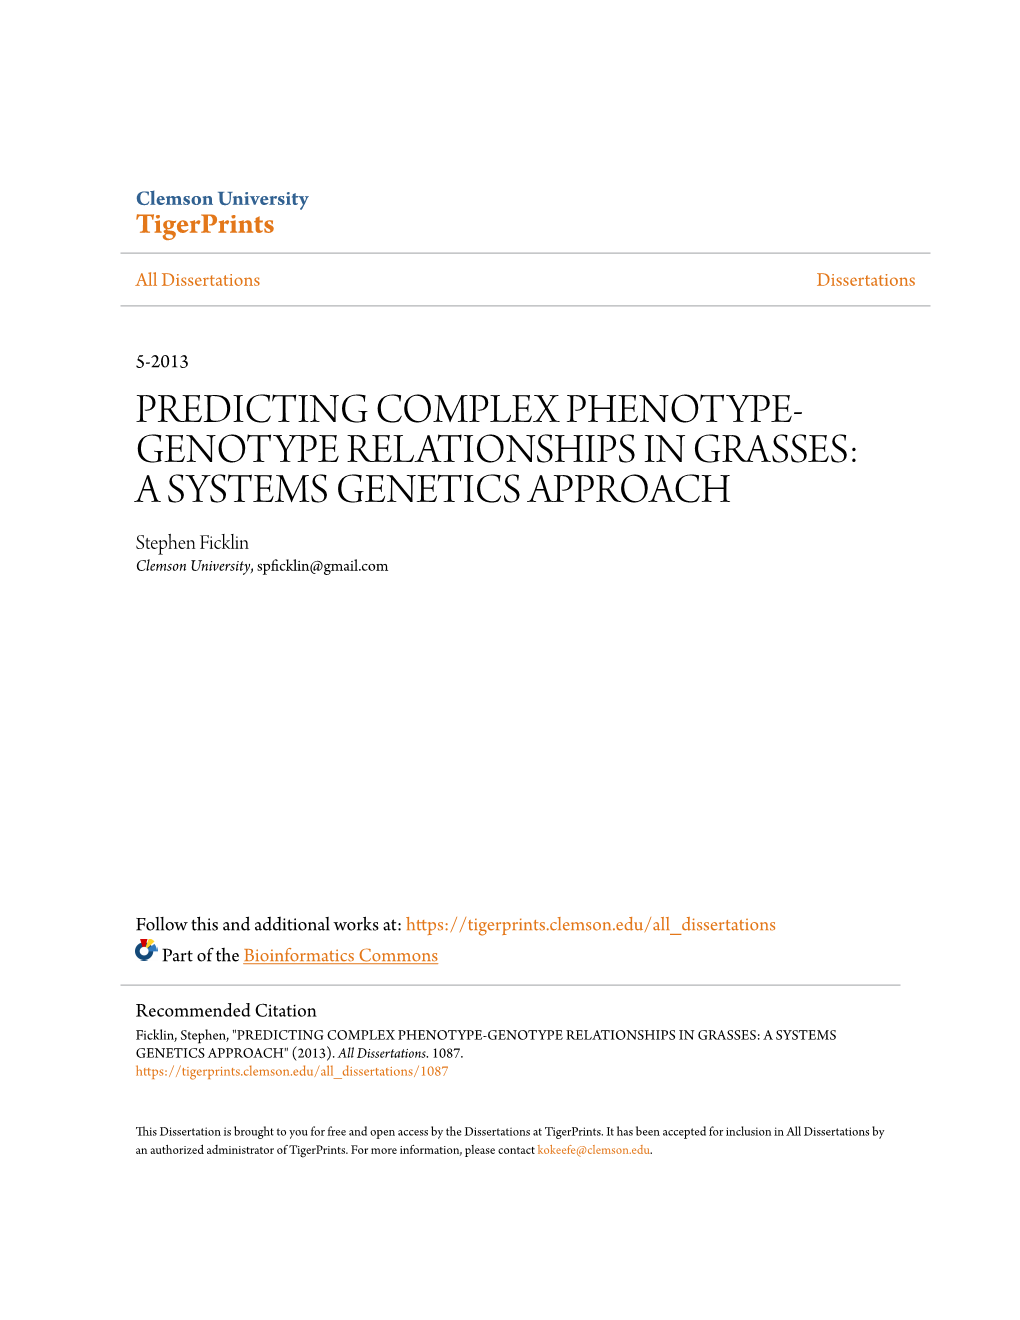 Predicting Complex Phenotype-Genotype Relationships in Grasses: a Systems Genetics Approach" (2013)